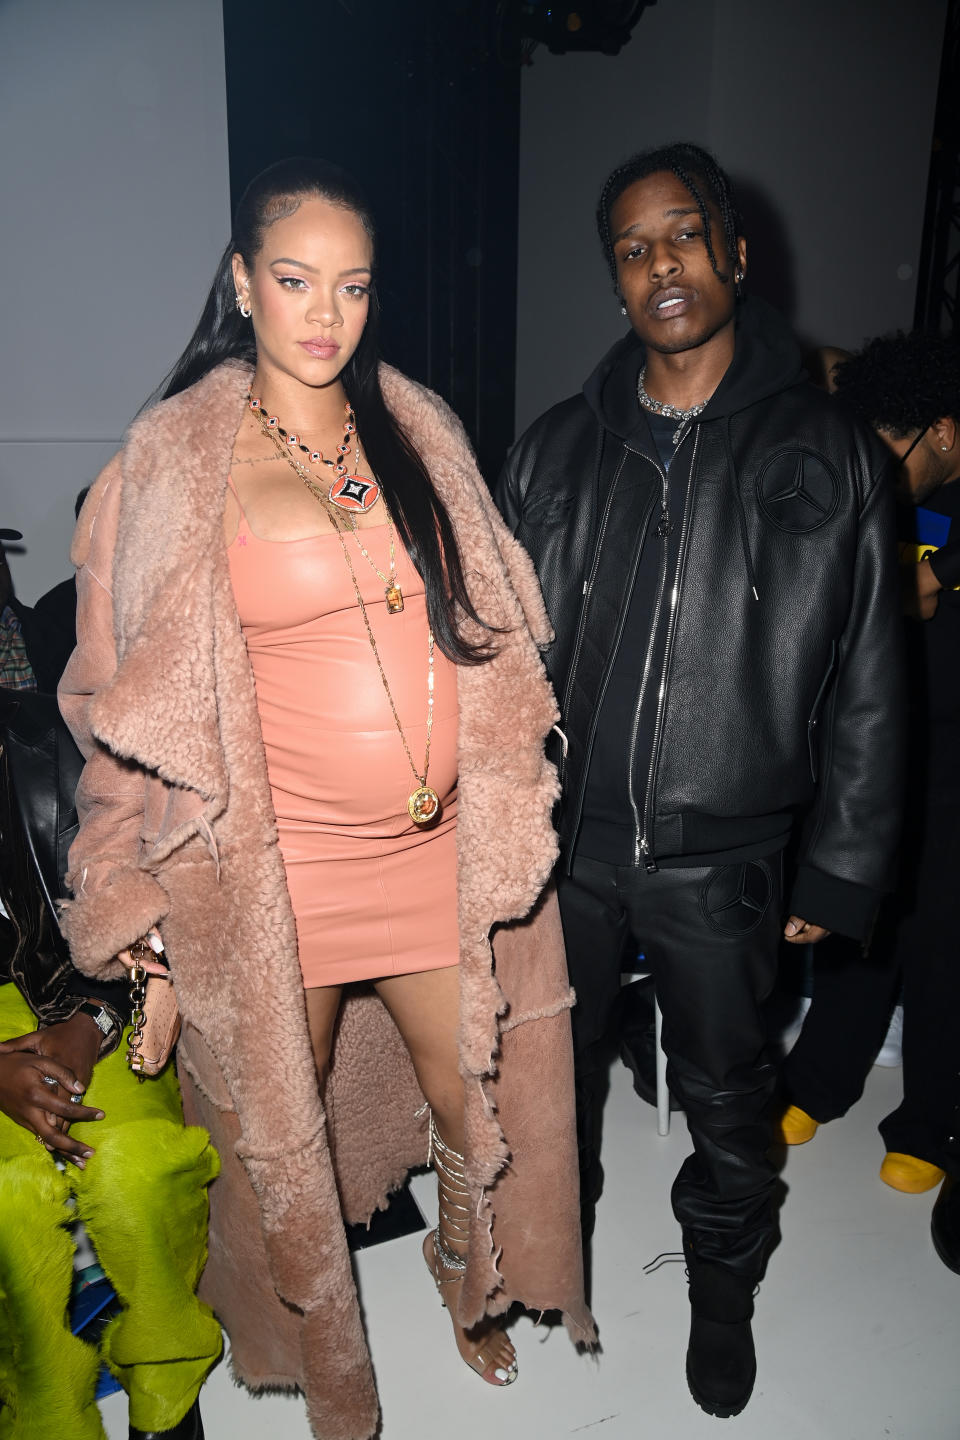 PARIS, FRANCE - FEBRUARY 28: (EDITORIAL USE ONLY - For Non-Editorial use please seek approval from Fashion House) Rihanna and ASAP Rocky attend the Off-White Womenswear Fall/Winter 2022/2023 show as part of Paris Fashion Week on February 28, 2022 in Paris, France. (Photo by Pascal Le Segretain/Getty Images)